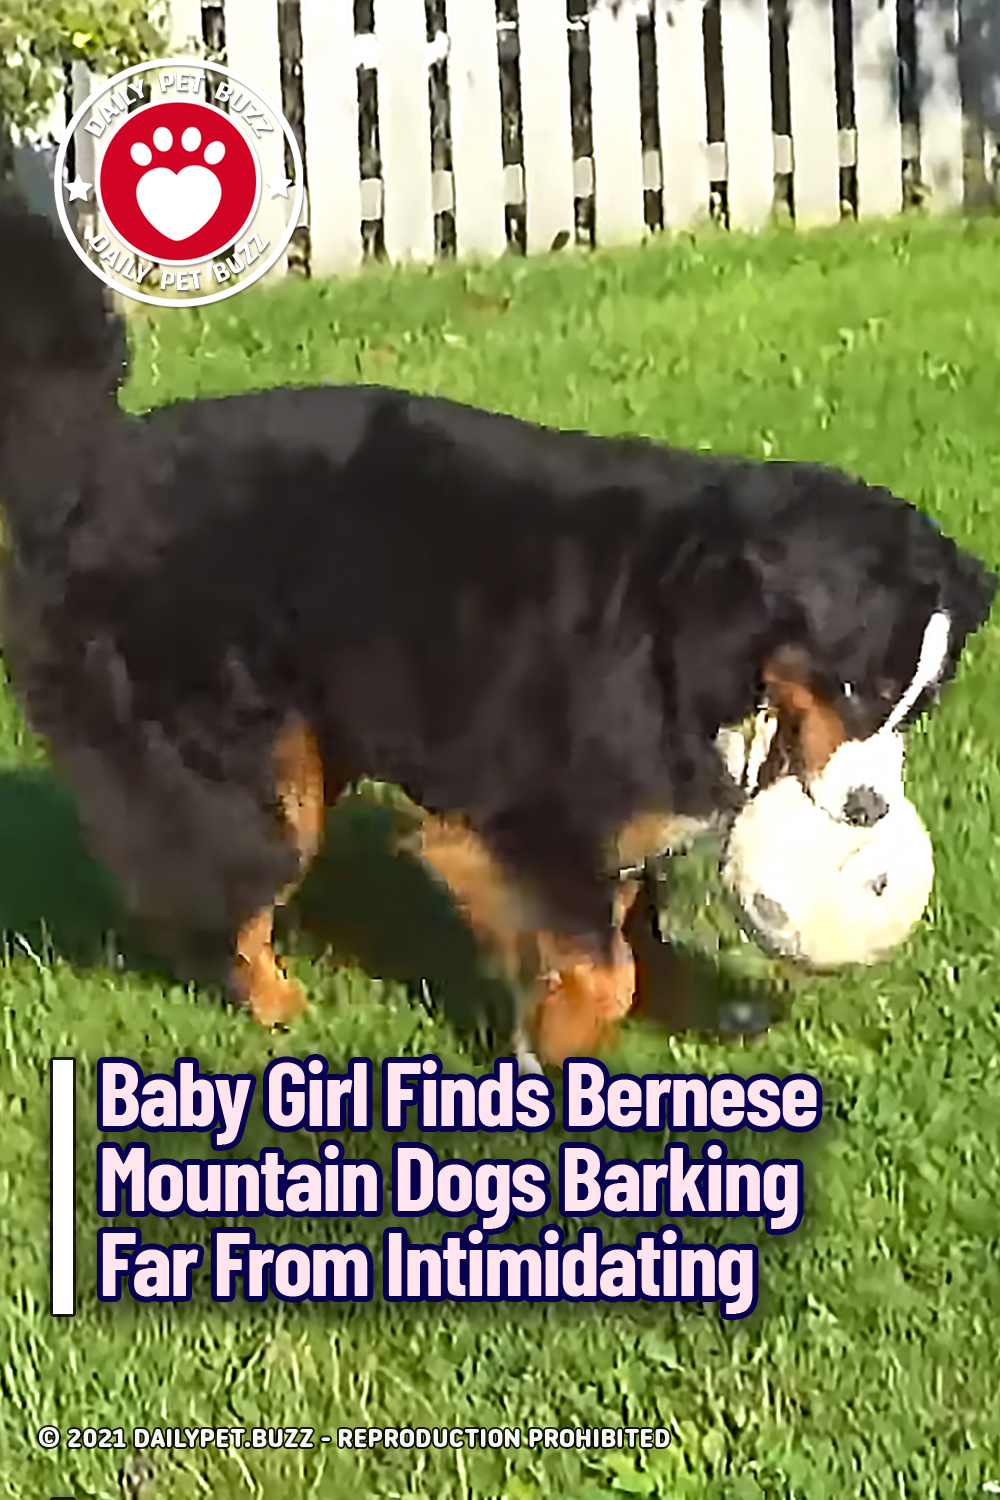 Baby Girl Finds Bernese Mountain Dogs Barking Far From Intimidating